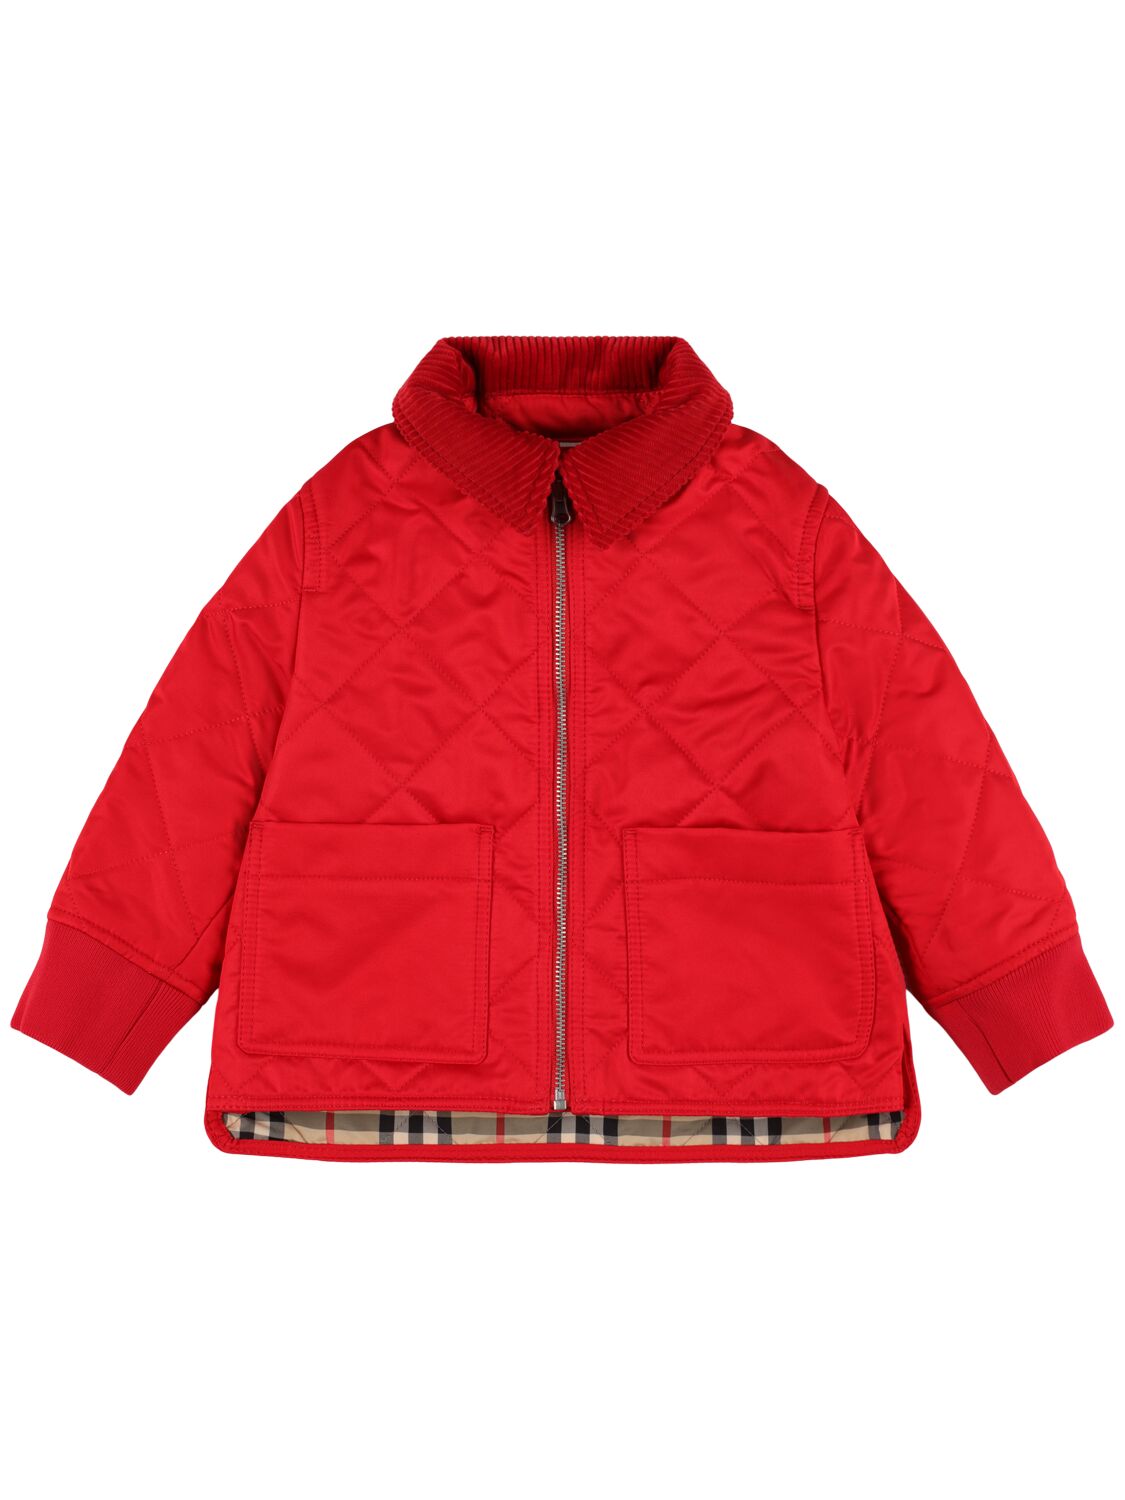 Burberry Kids' Jacket W/ Check Lining In Red